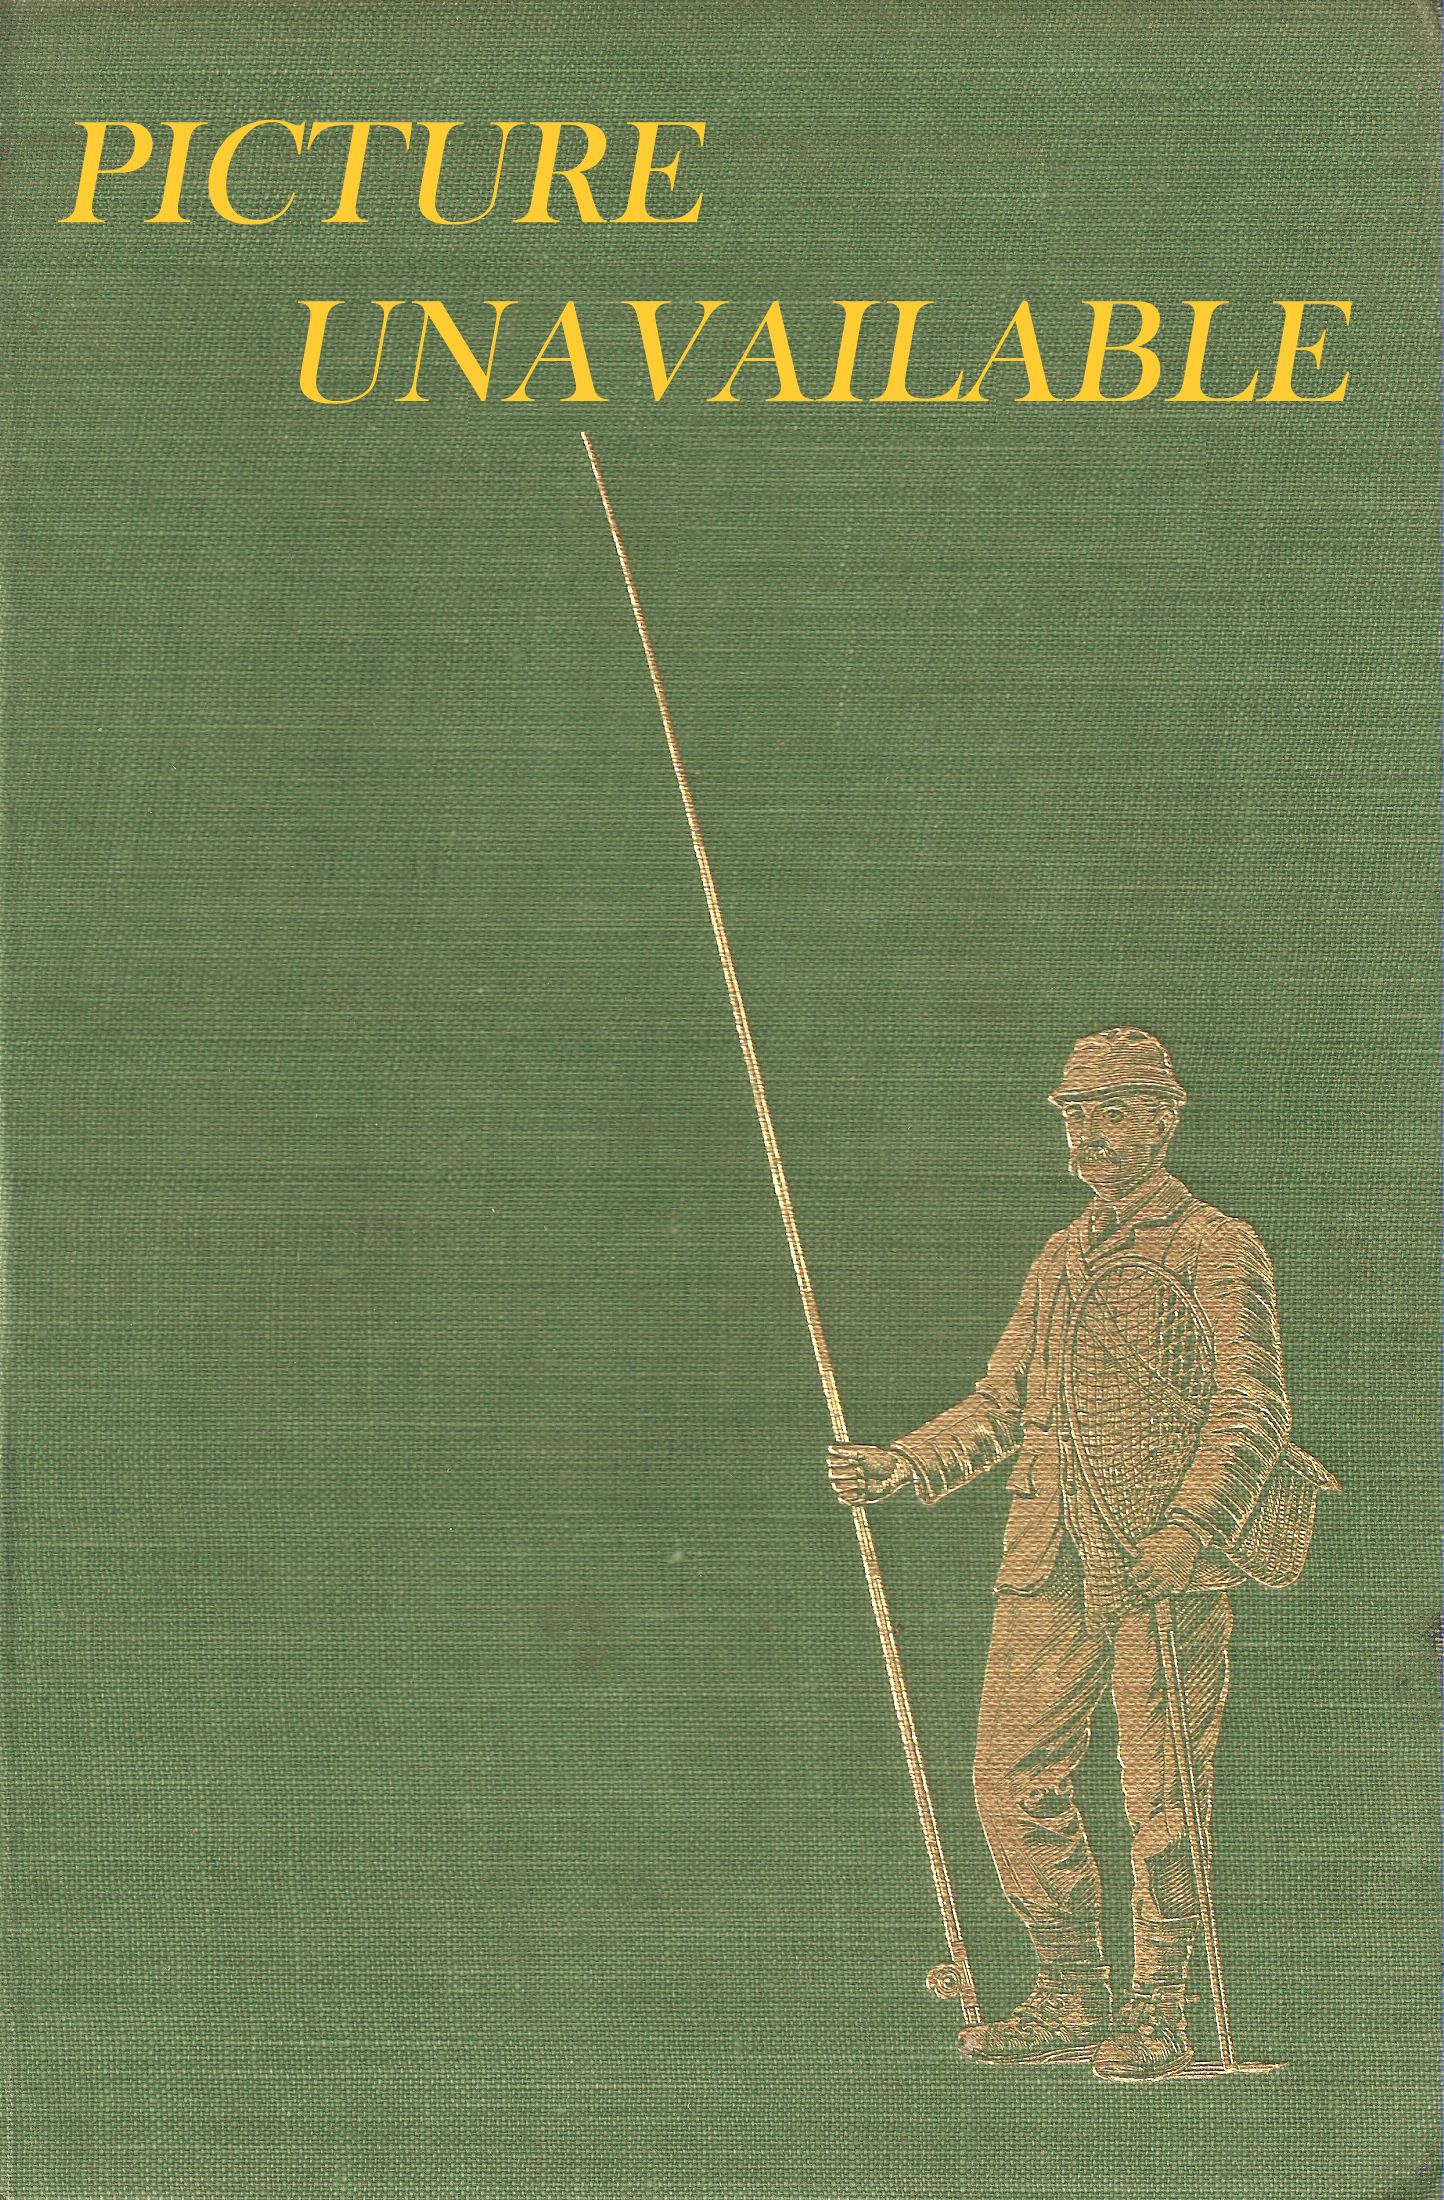 SEA-FISH: AN ACCOUNT OF THE METHODS OF ANGLING AS PRACTICED ON THE ENGLISH  COAST, WITH NOTES ON THE CAPTURE OF THE MORE SPORTING FISHES IN  CONTINENTAL, SOUTH AFRICAN, AND AUSTRALIAN WATERS. By F.G. Aflalo. The  Angler's Library Volume II.